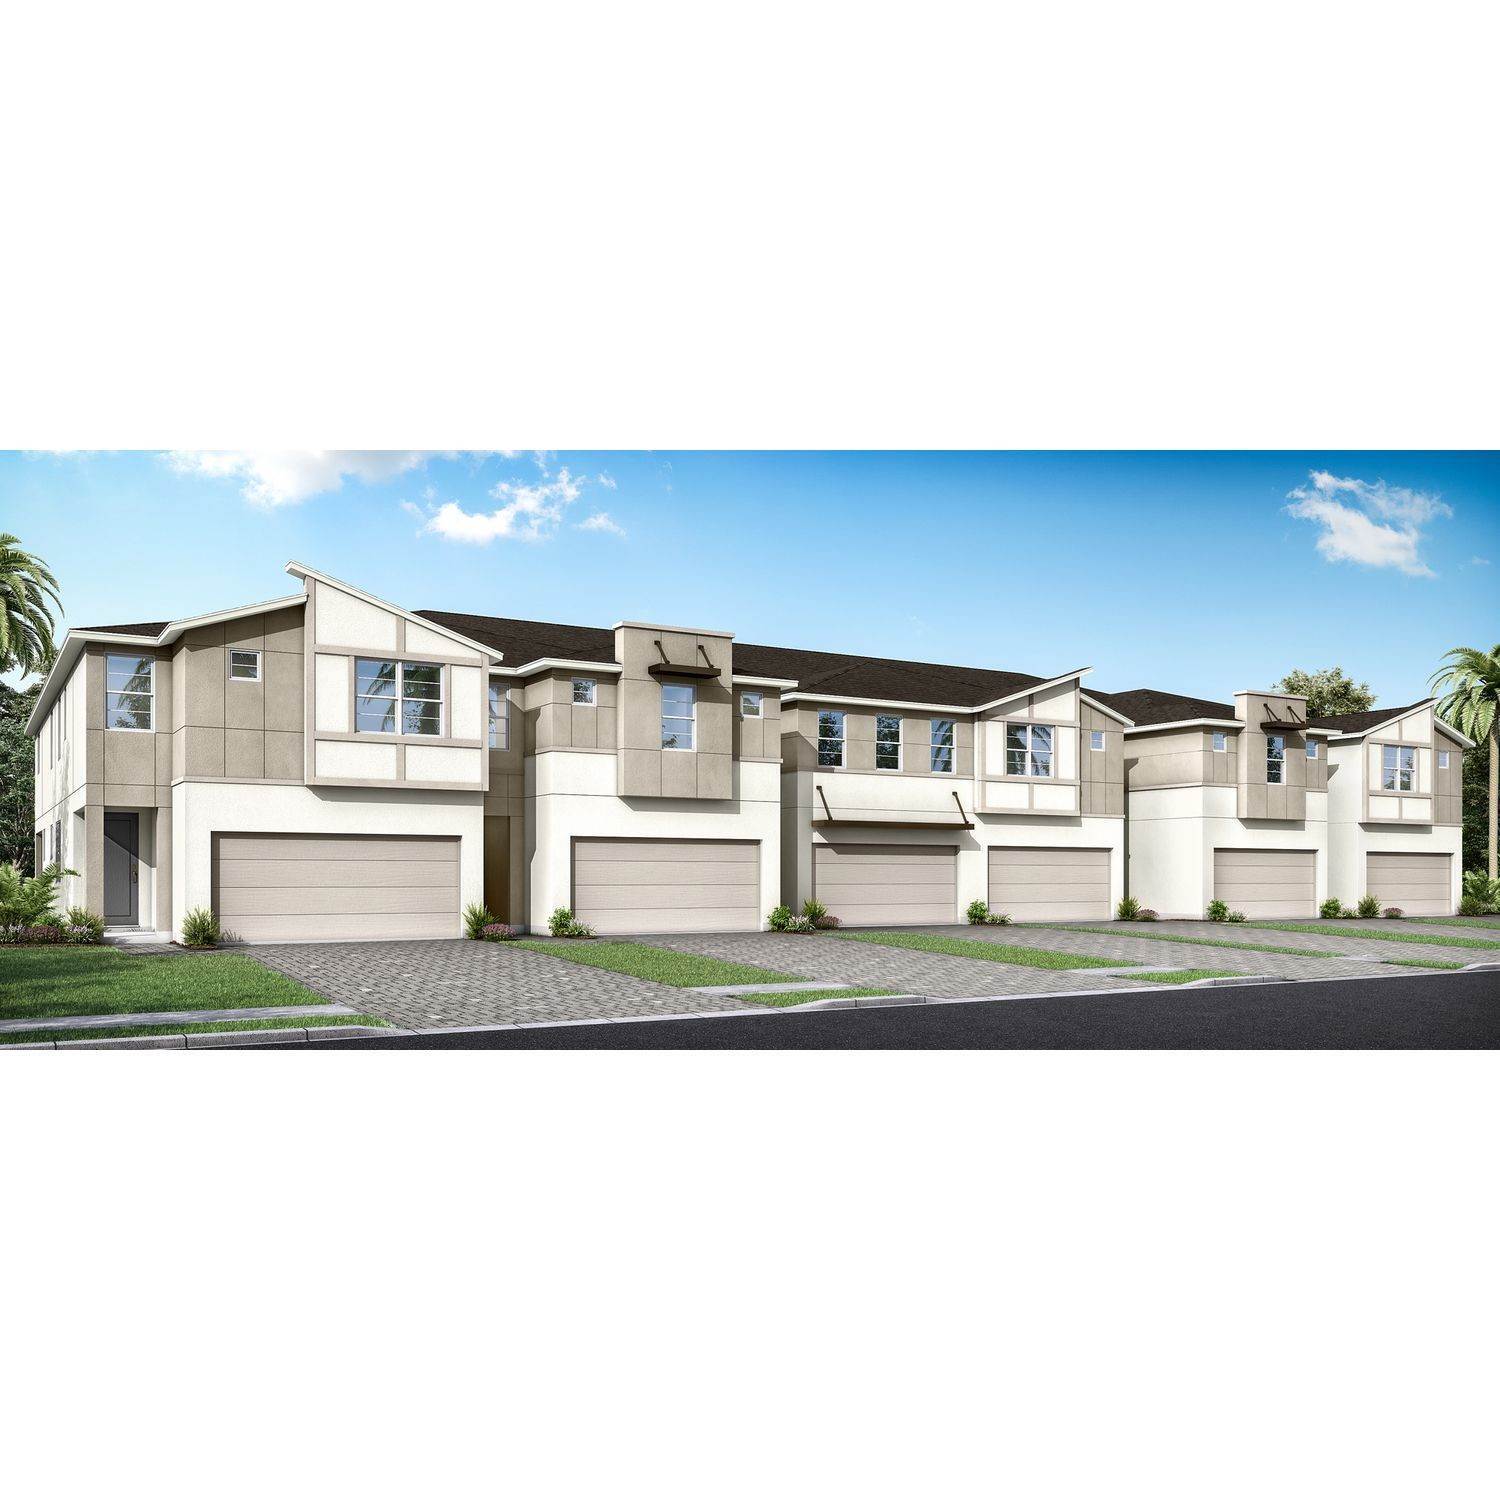 Multi Family for Sale at Lutz, FL 33559